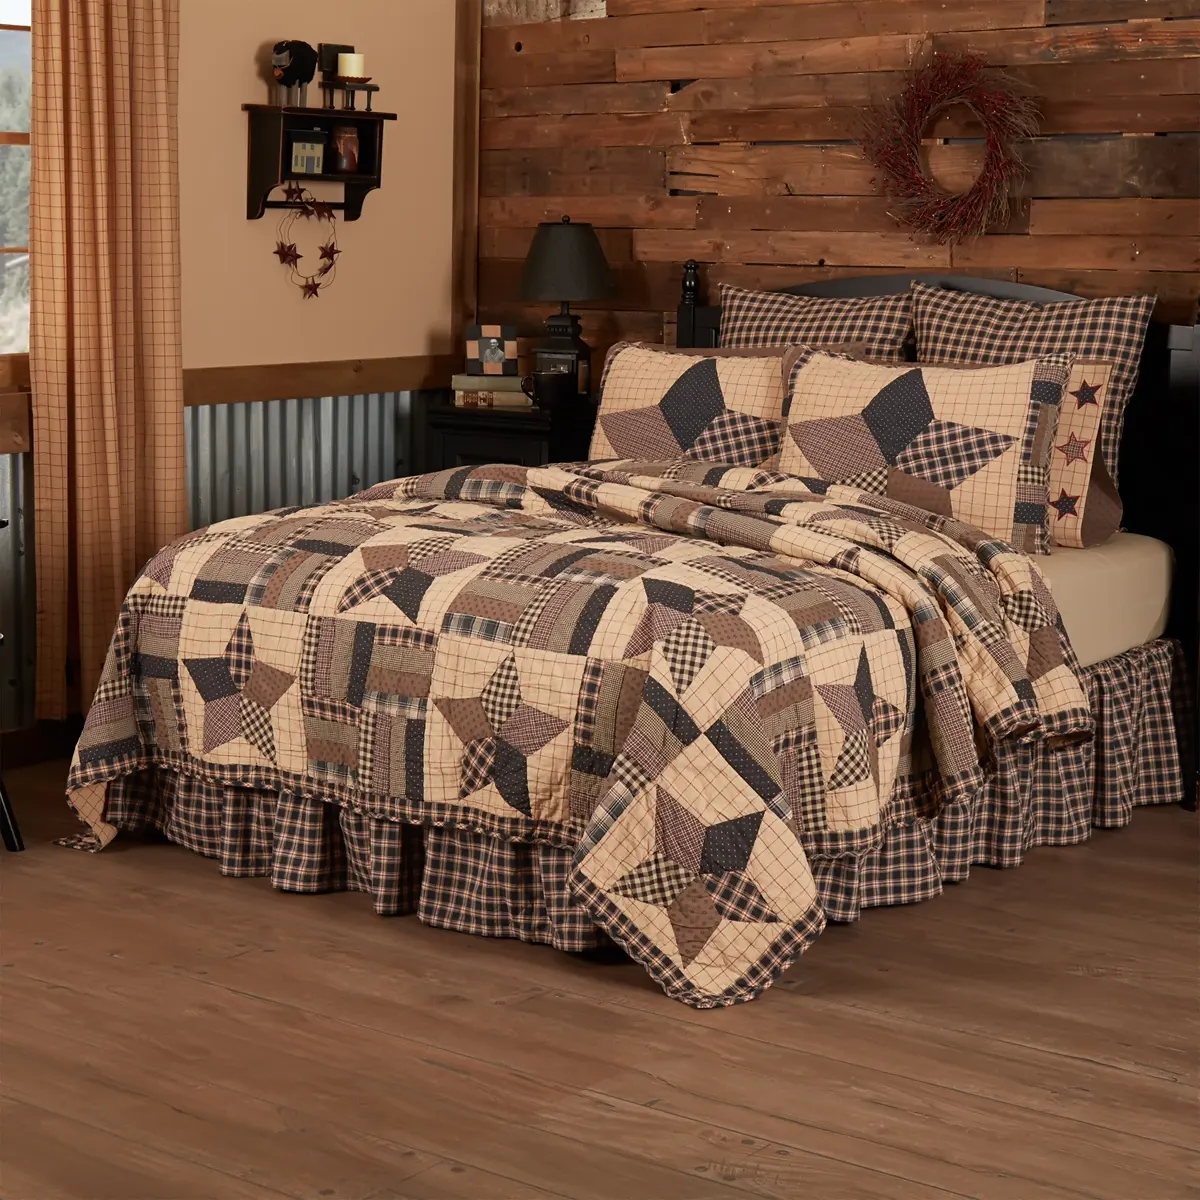 Bingham Star Luxury King Quilt 120Wx105L on bed